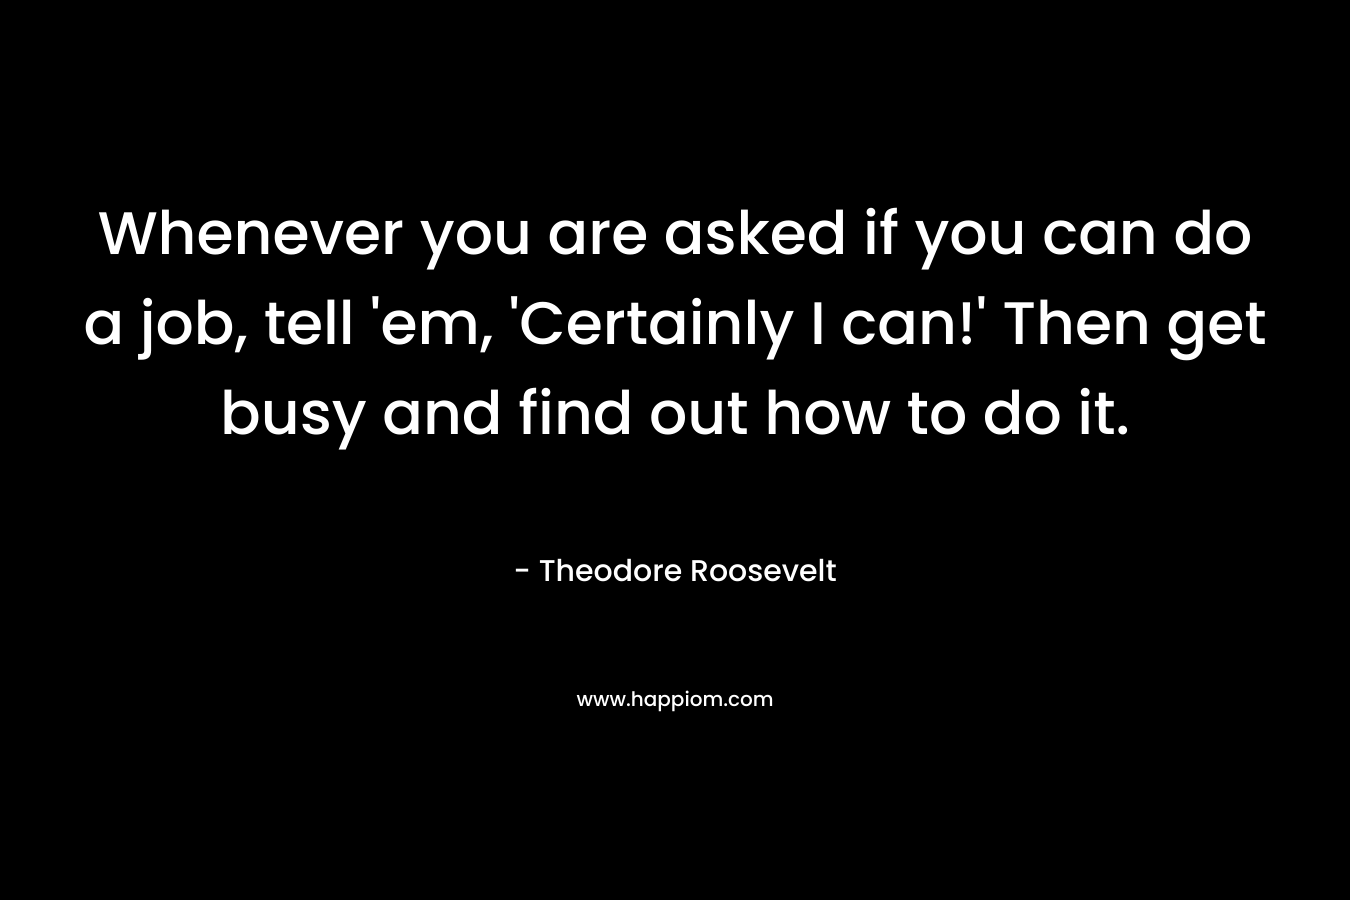 Whenever you are asked if you can do a job, tell ’em, ‘Certainly I can!’ Then get busy and find out how to do it. – Theodore Roosevelt